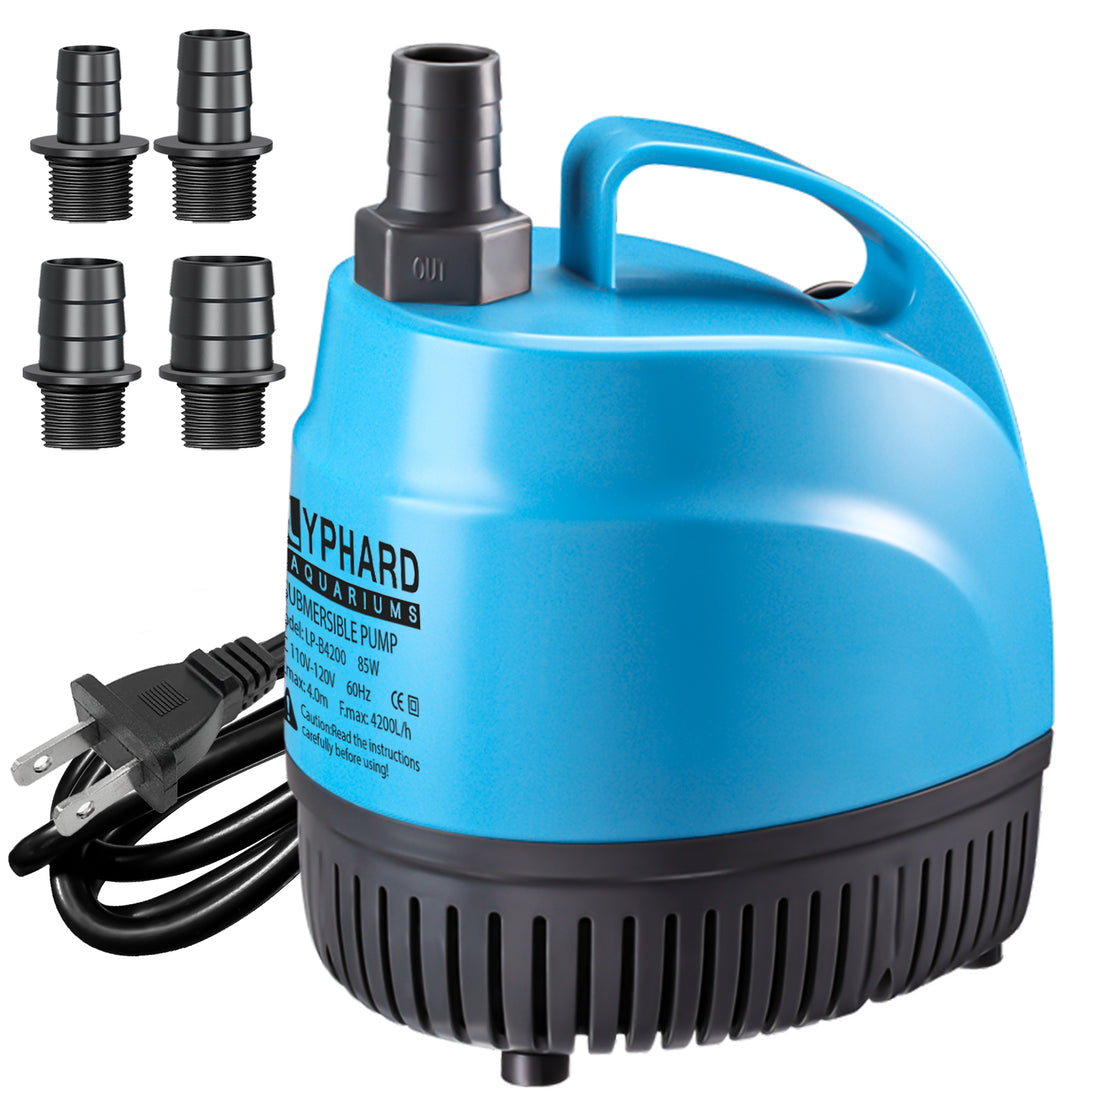 Submersible Water Pump 85W